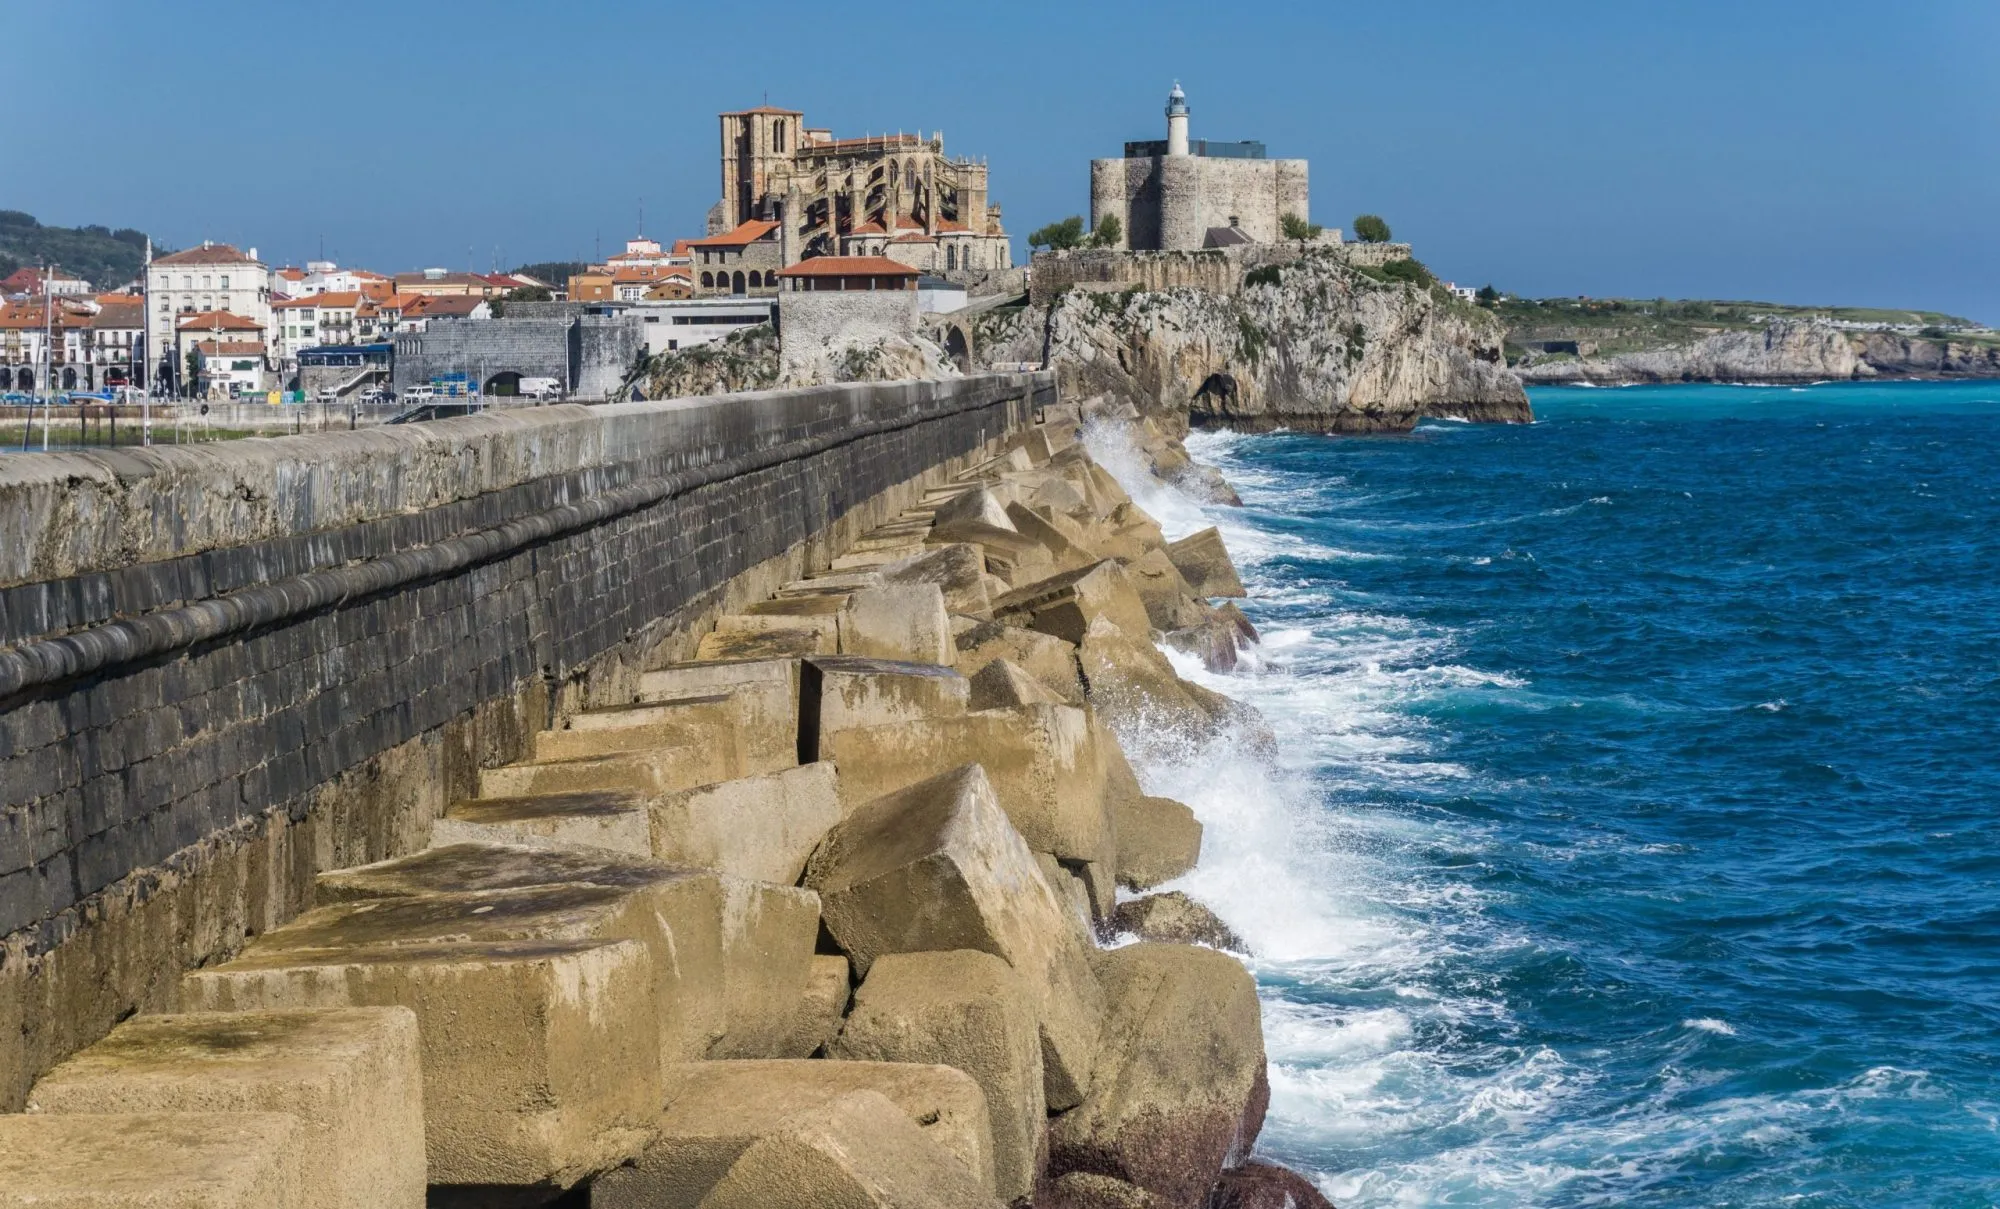 Breakwater Castro Urdiales and cathedral